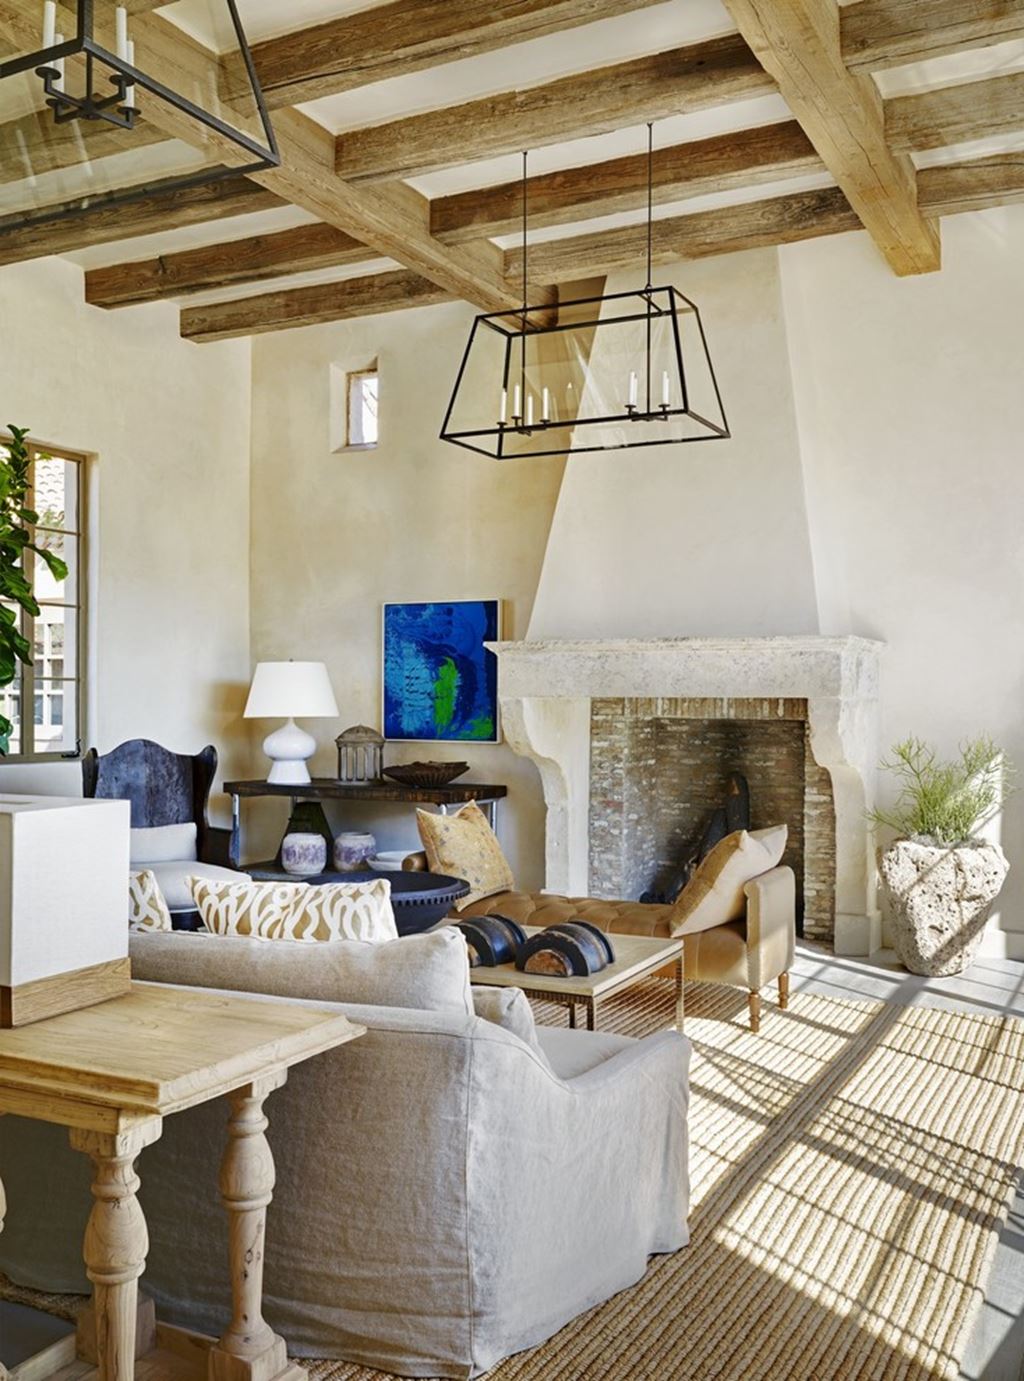 Mediterranean Fusion: Blending Modern Elements With Traditional Flair